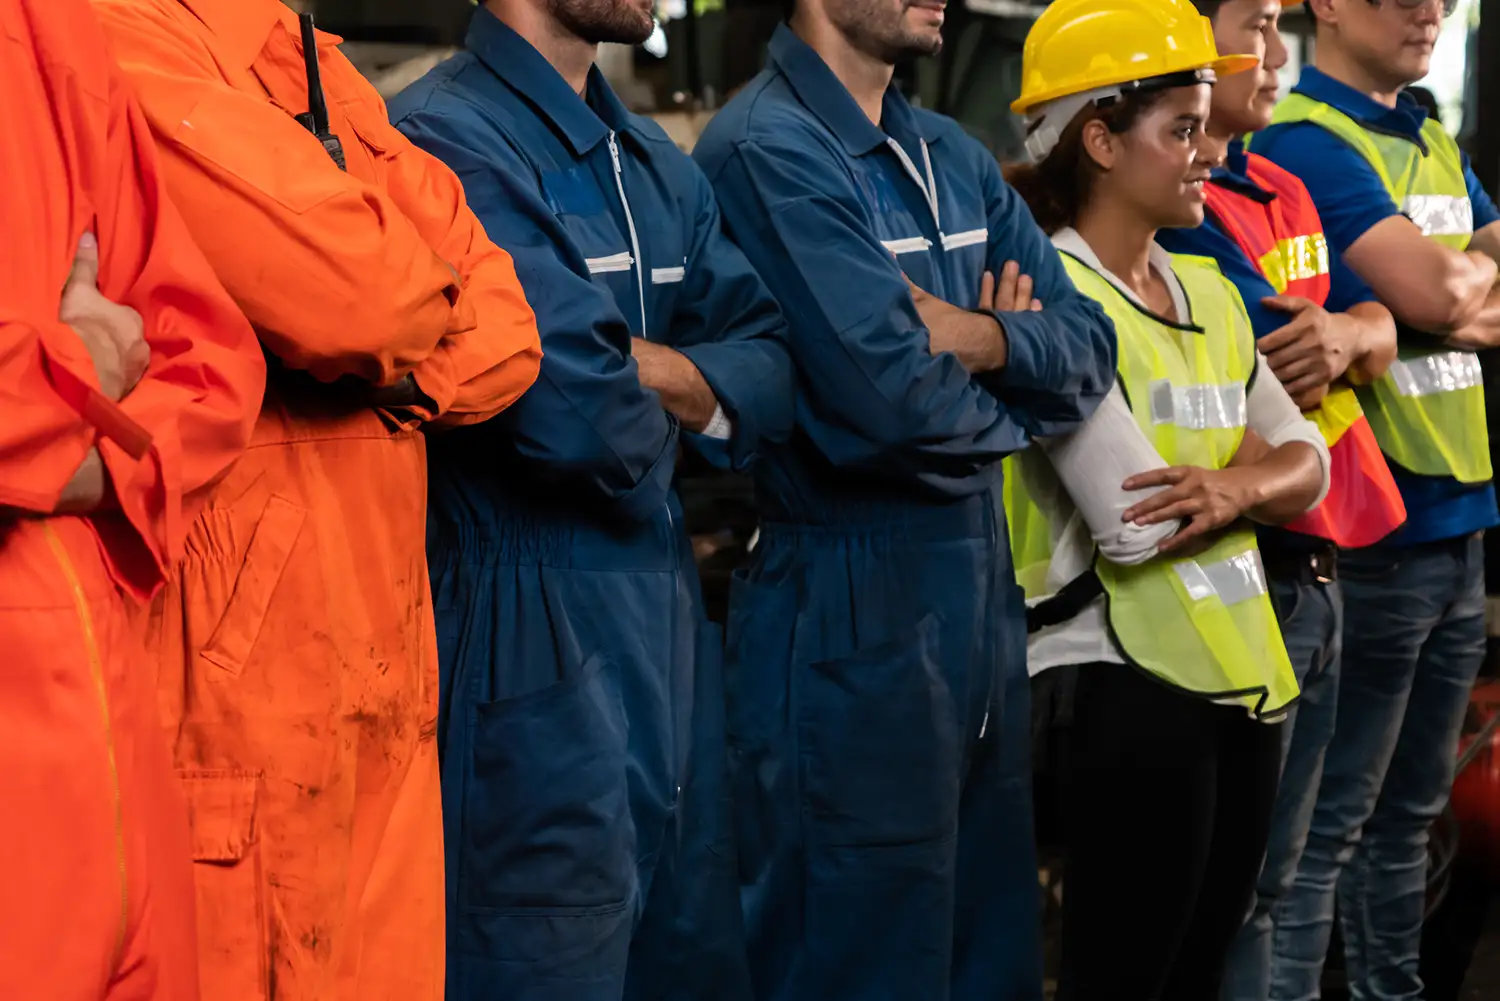 Male and female workers dressed in safety vests